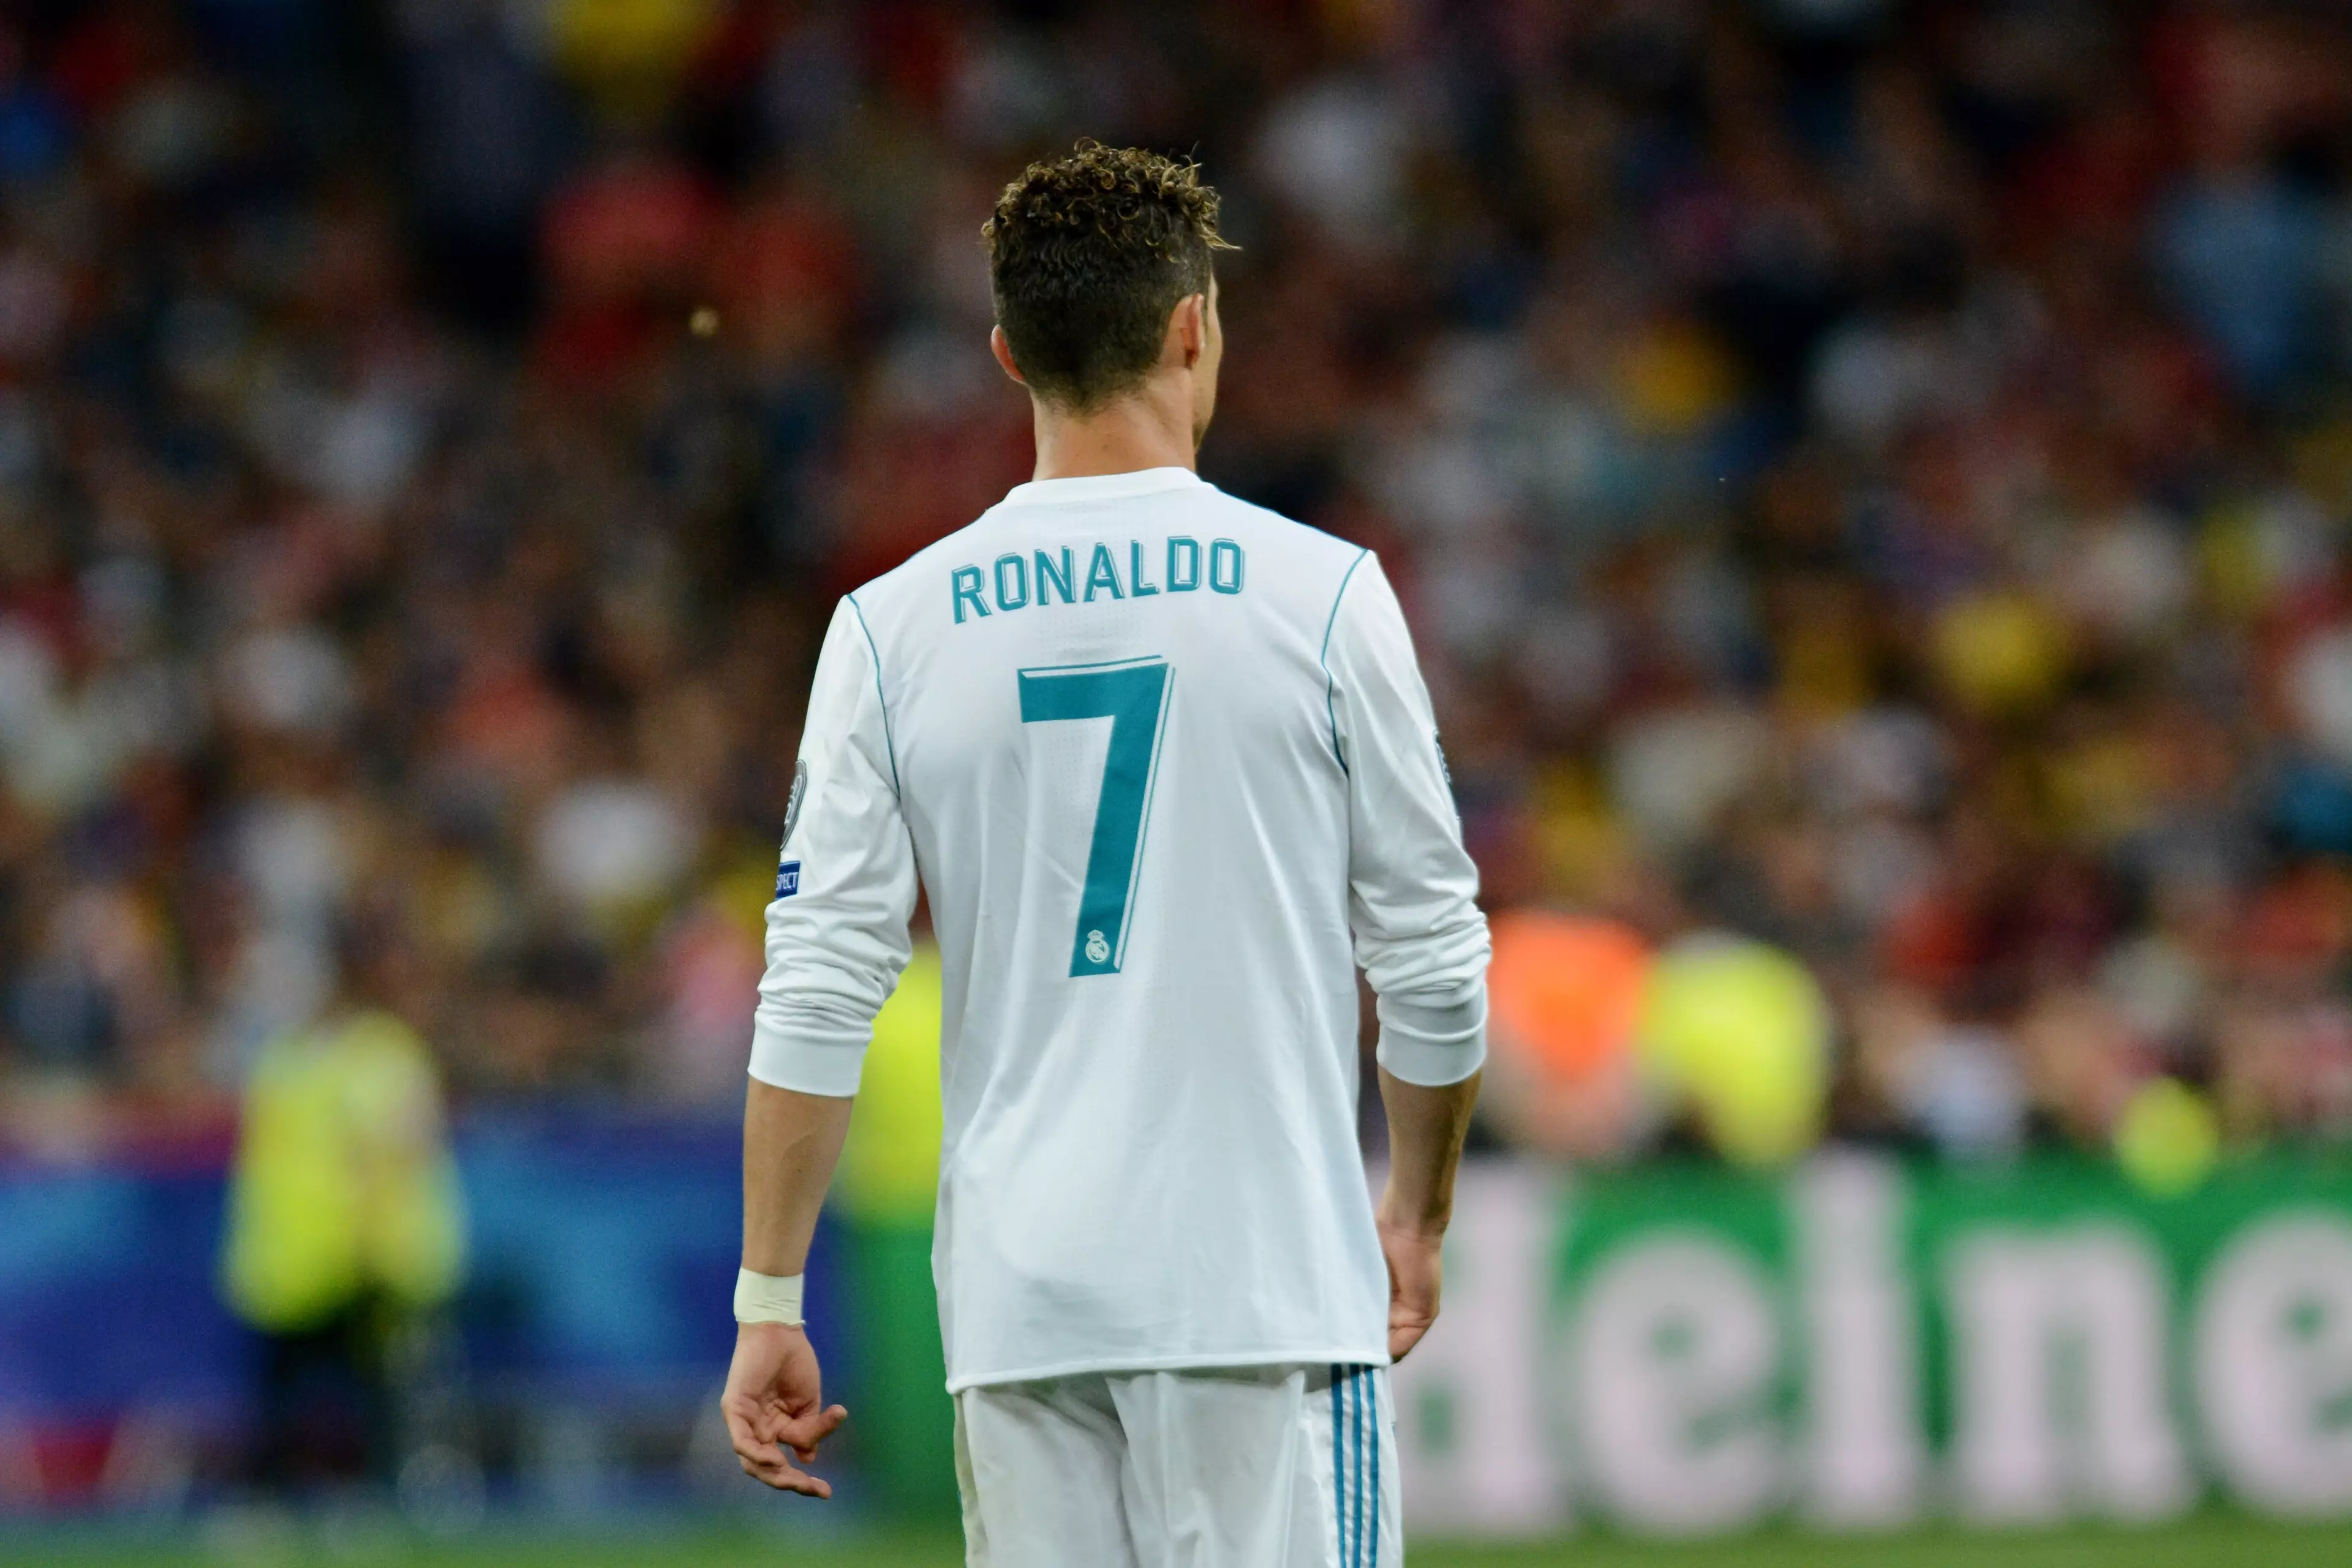 The number seven is vacant at Real Madrid after Ronaldo's departure. Image: PA Images